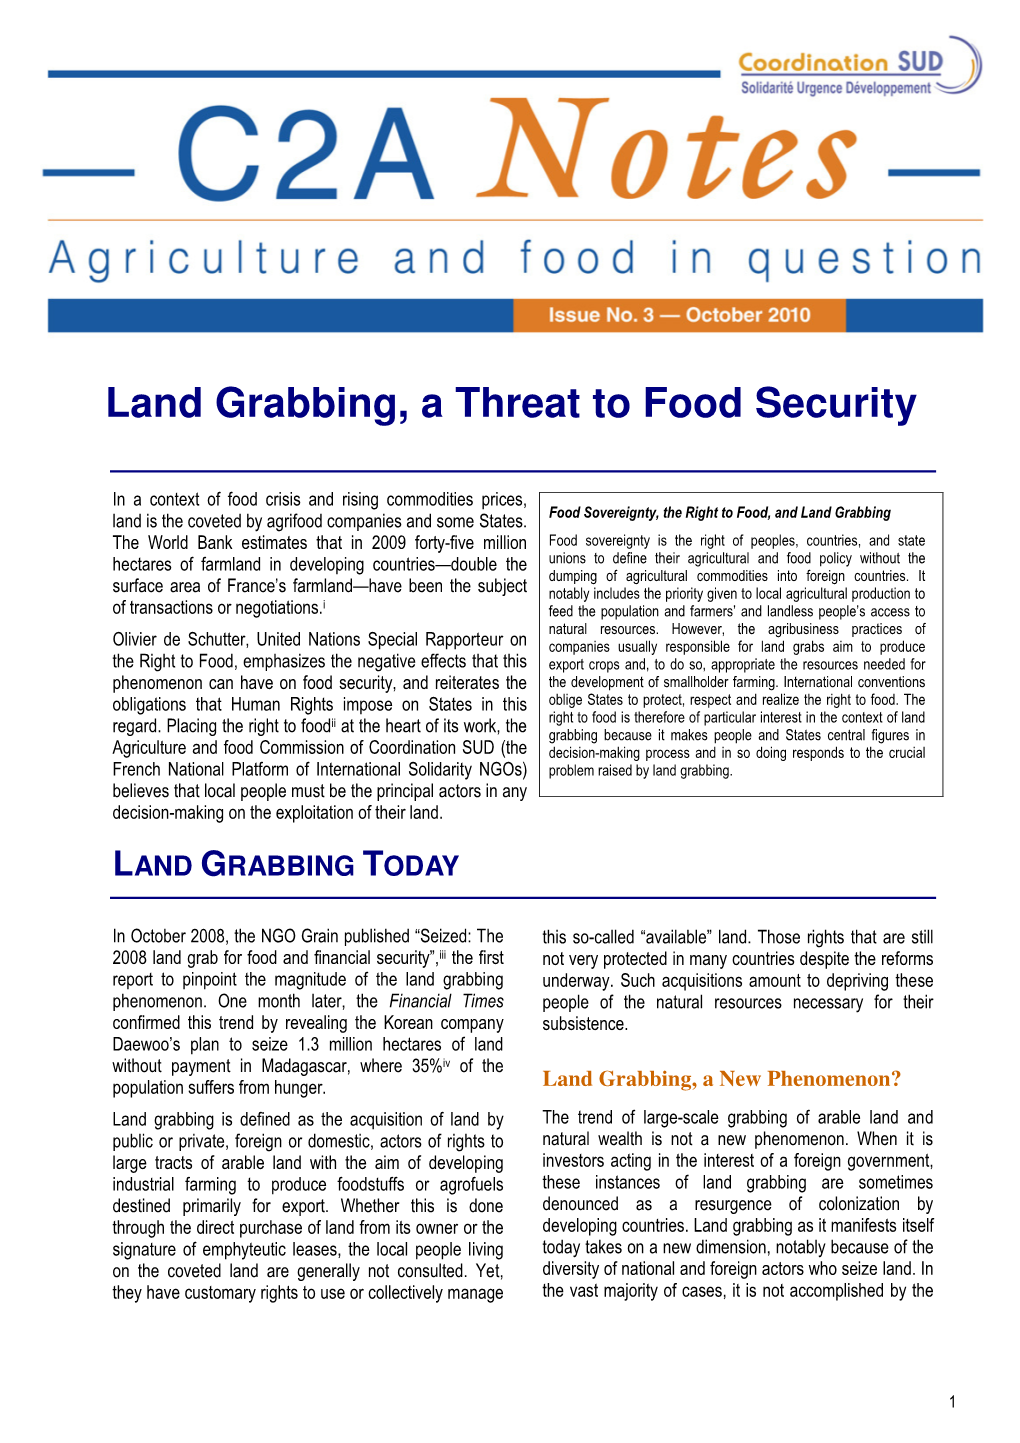 Land Grabbing, a Threat to Food Security